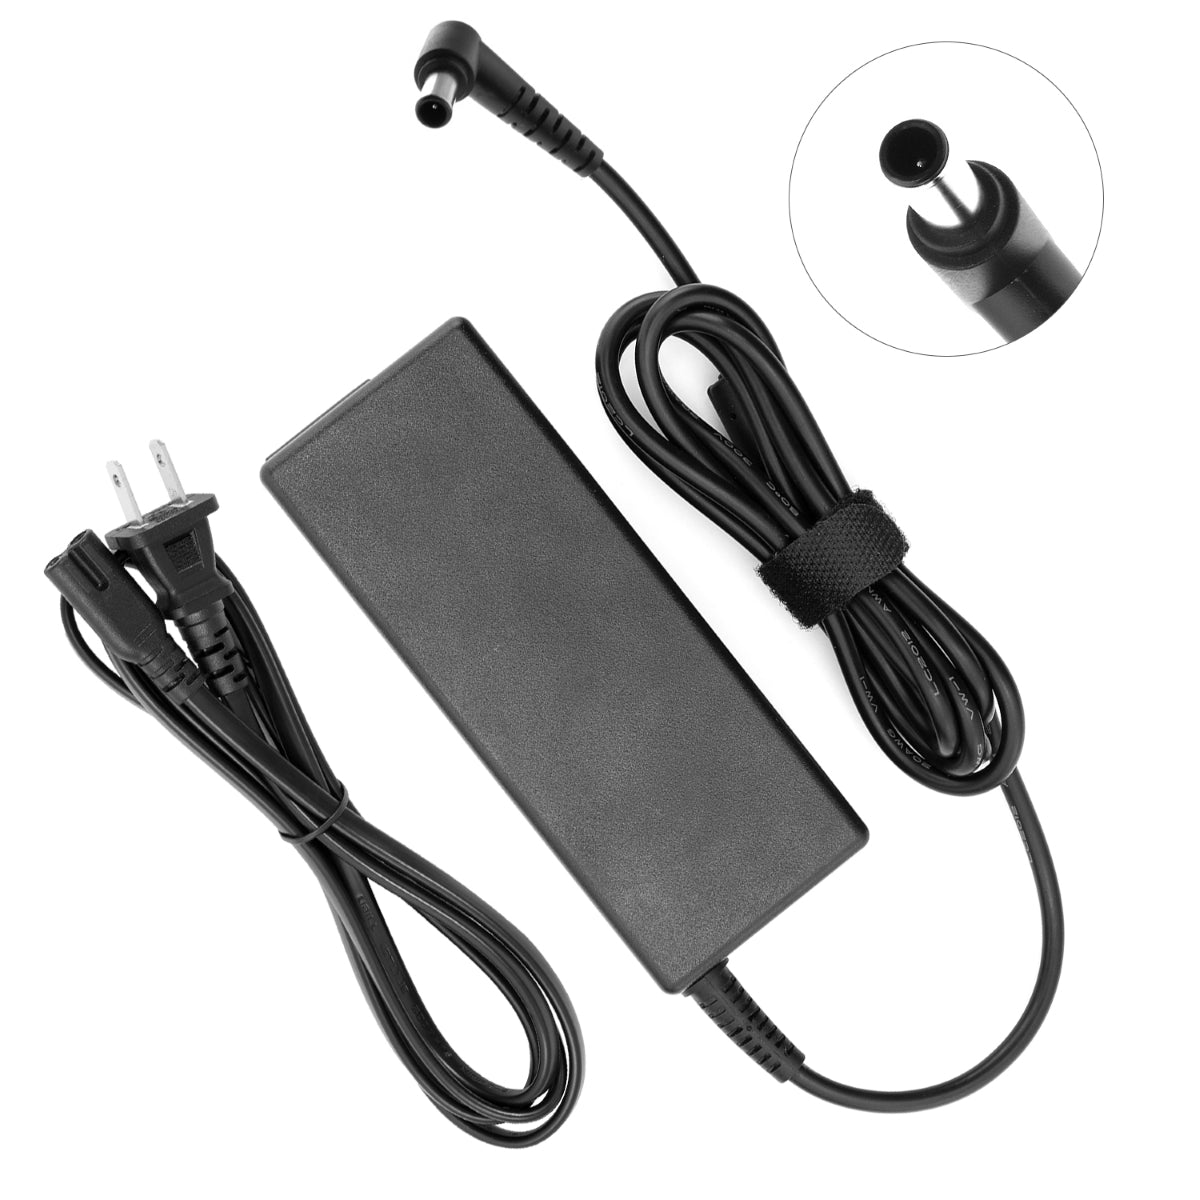 Compatible Charger for Sony Vaio PCG-71212L